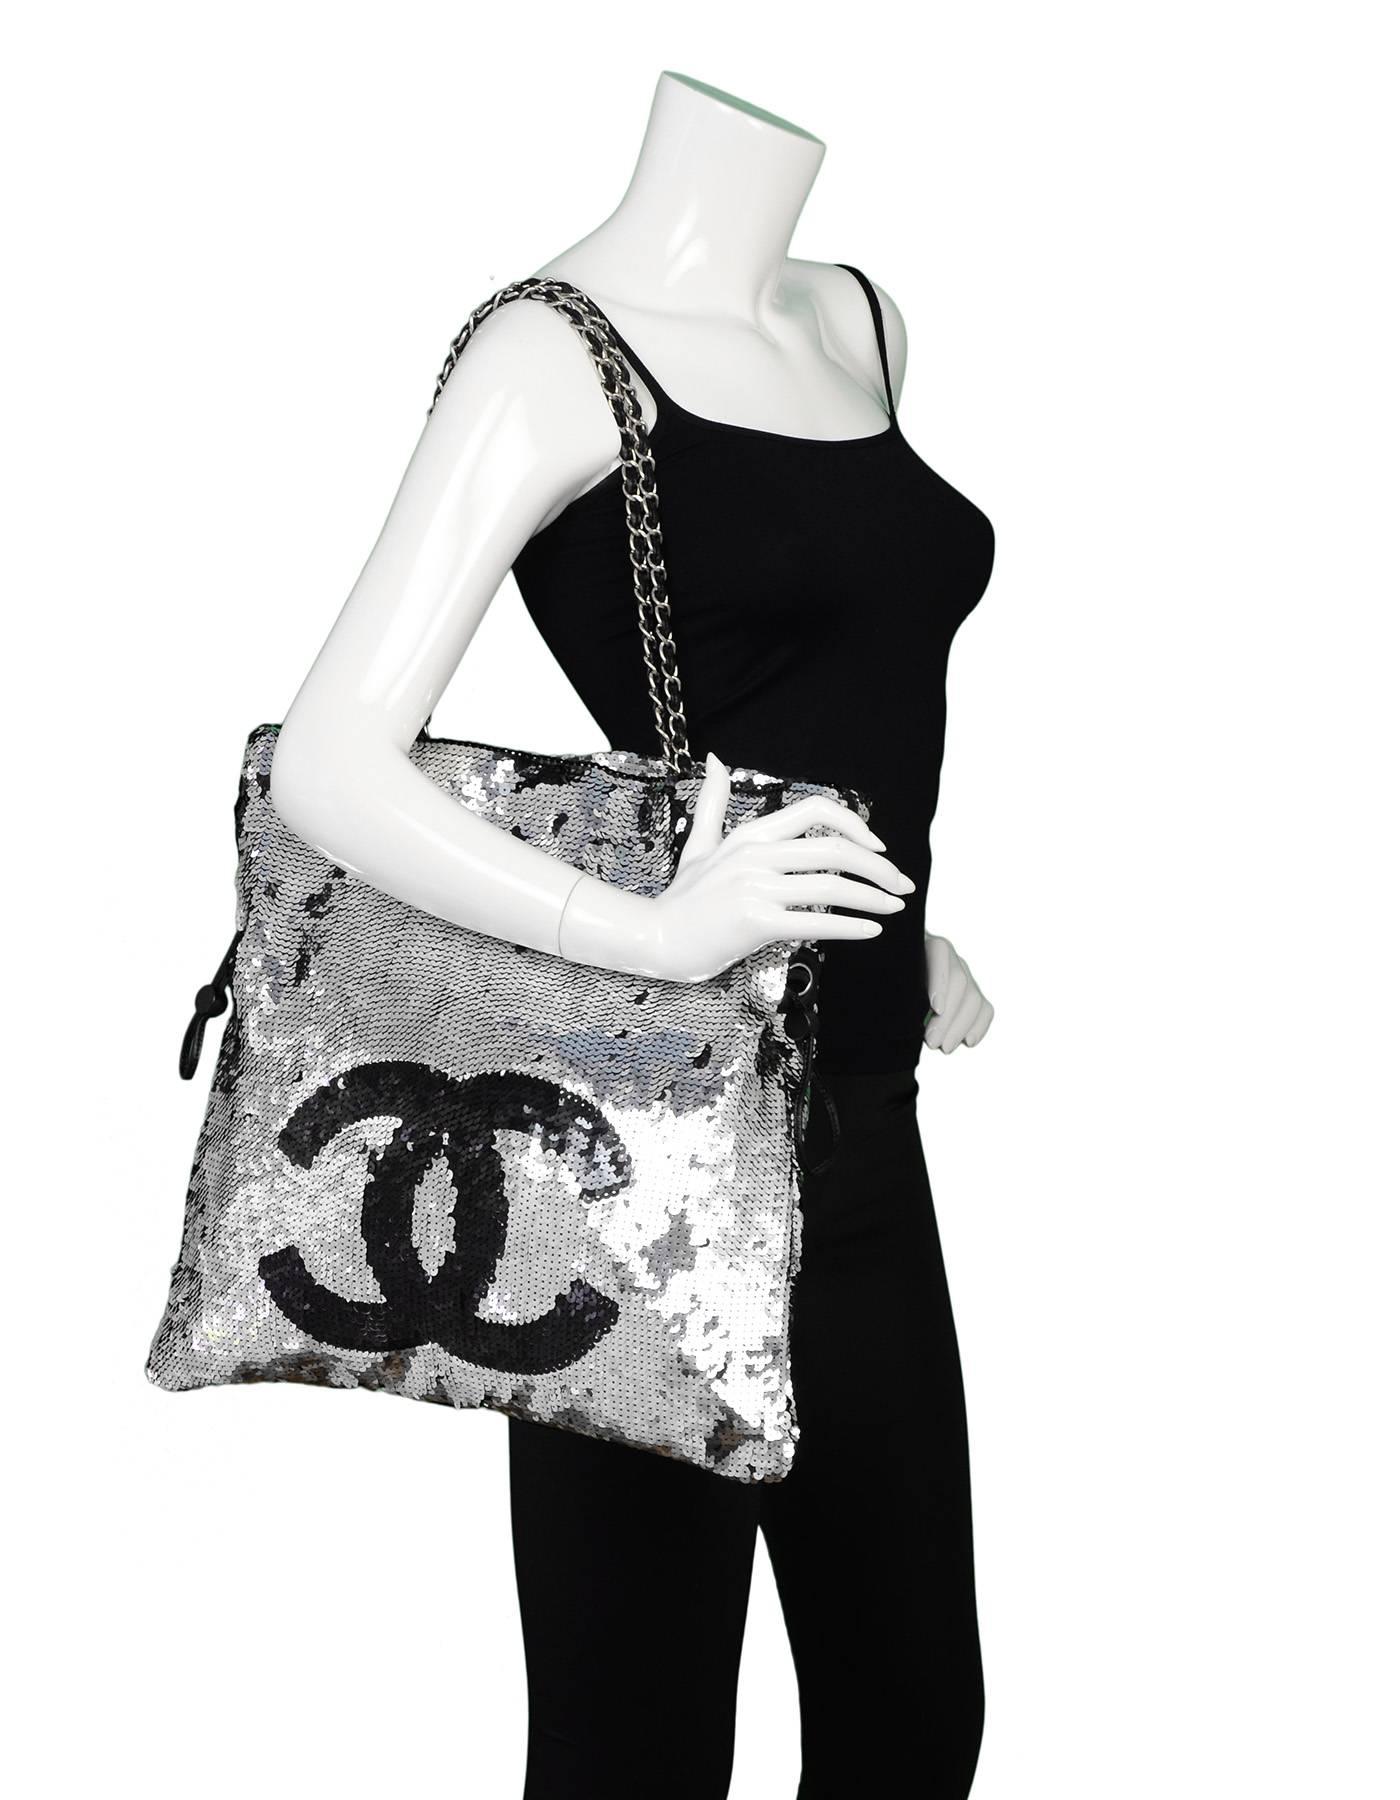 Chanel Silver and Black Sequined Summer Nights Tote Bag

Made In: Italy
Year of Production: 2005-2006
Color: Silver, black
Hardware: Silvertone
Materials: Sequin, leather, metal
Lining: Black textile
Closure/opening: Open top with center snap